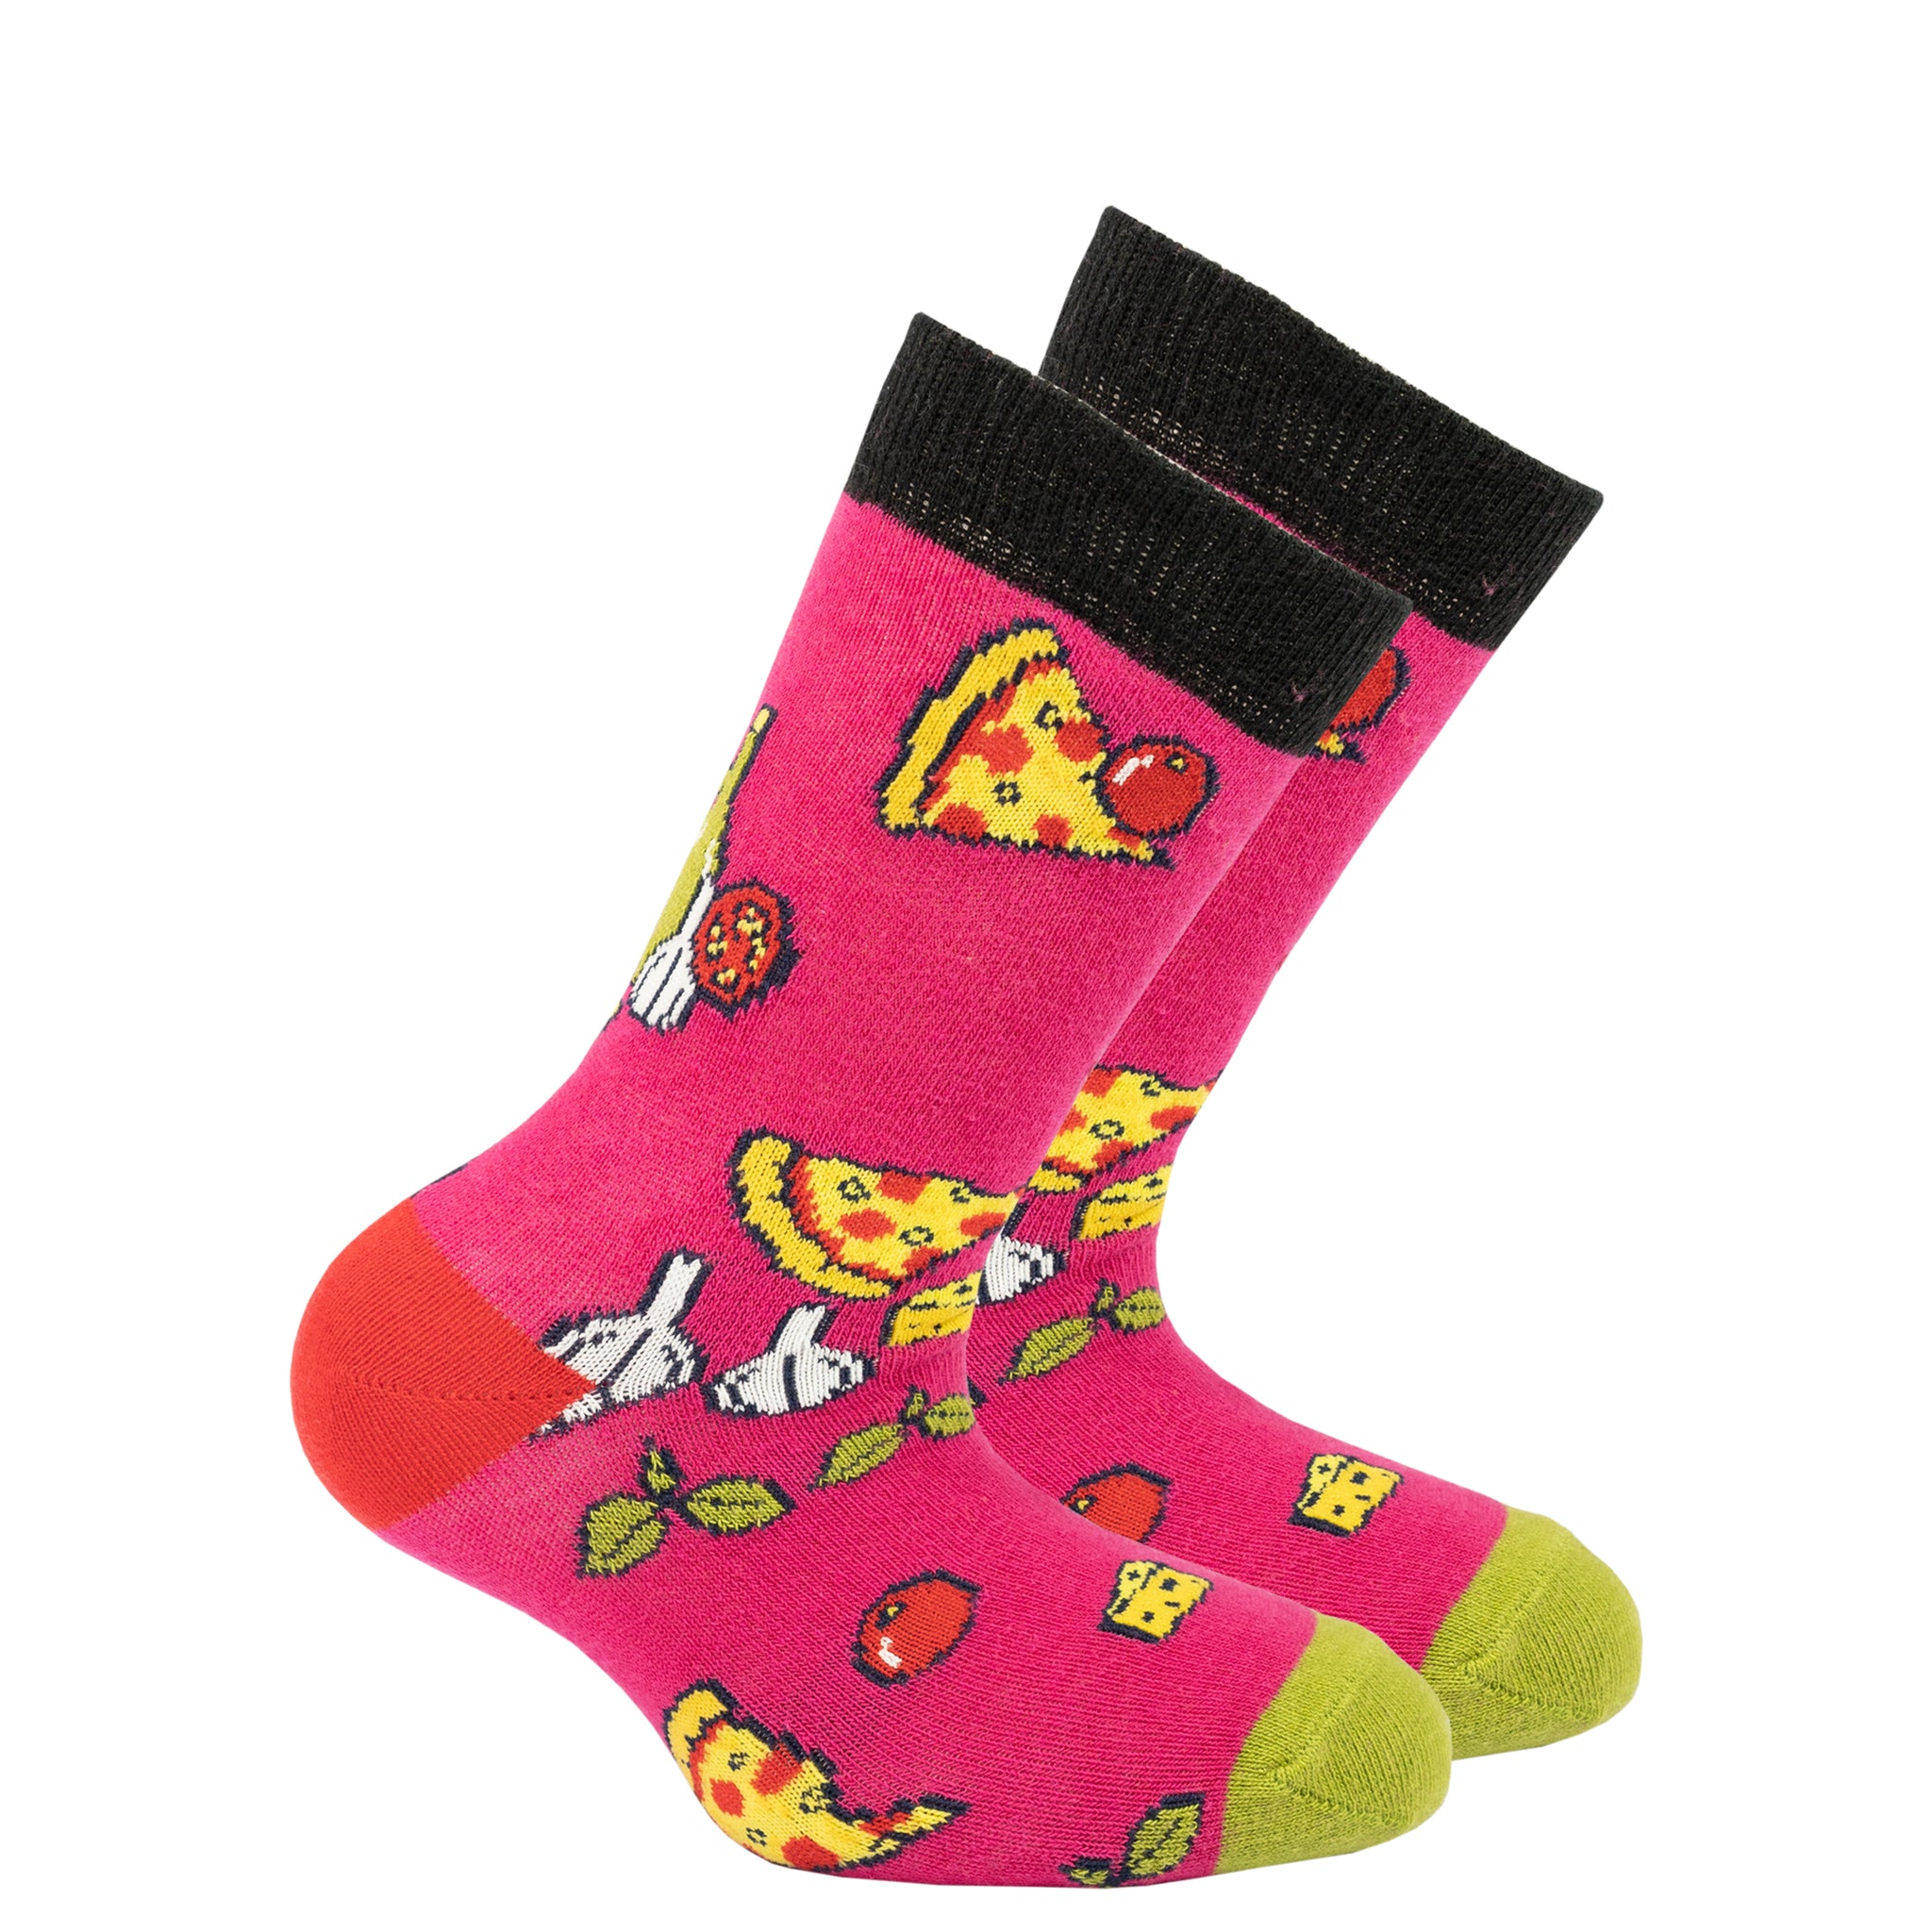 Kids Pizza Chef Socks red and pink